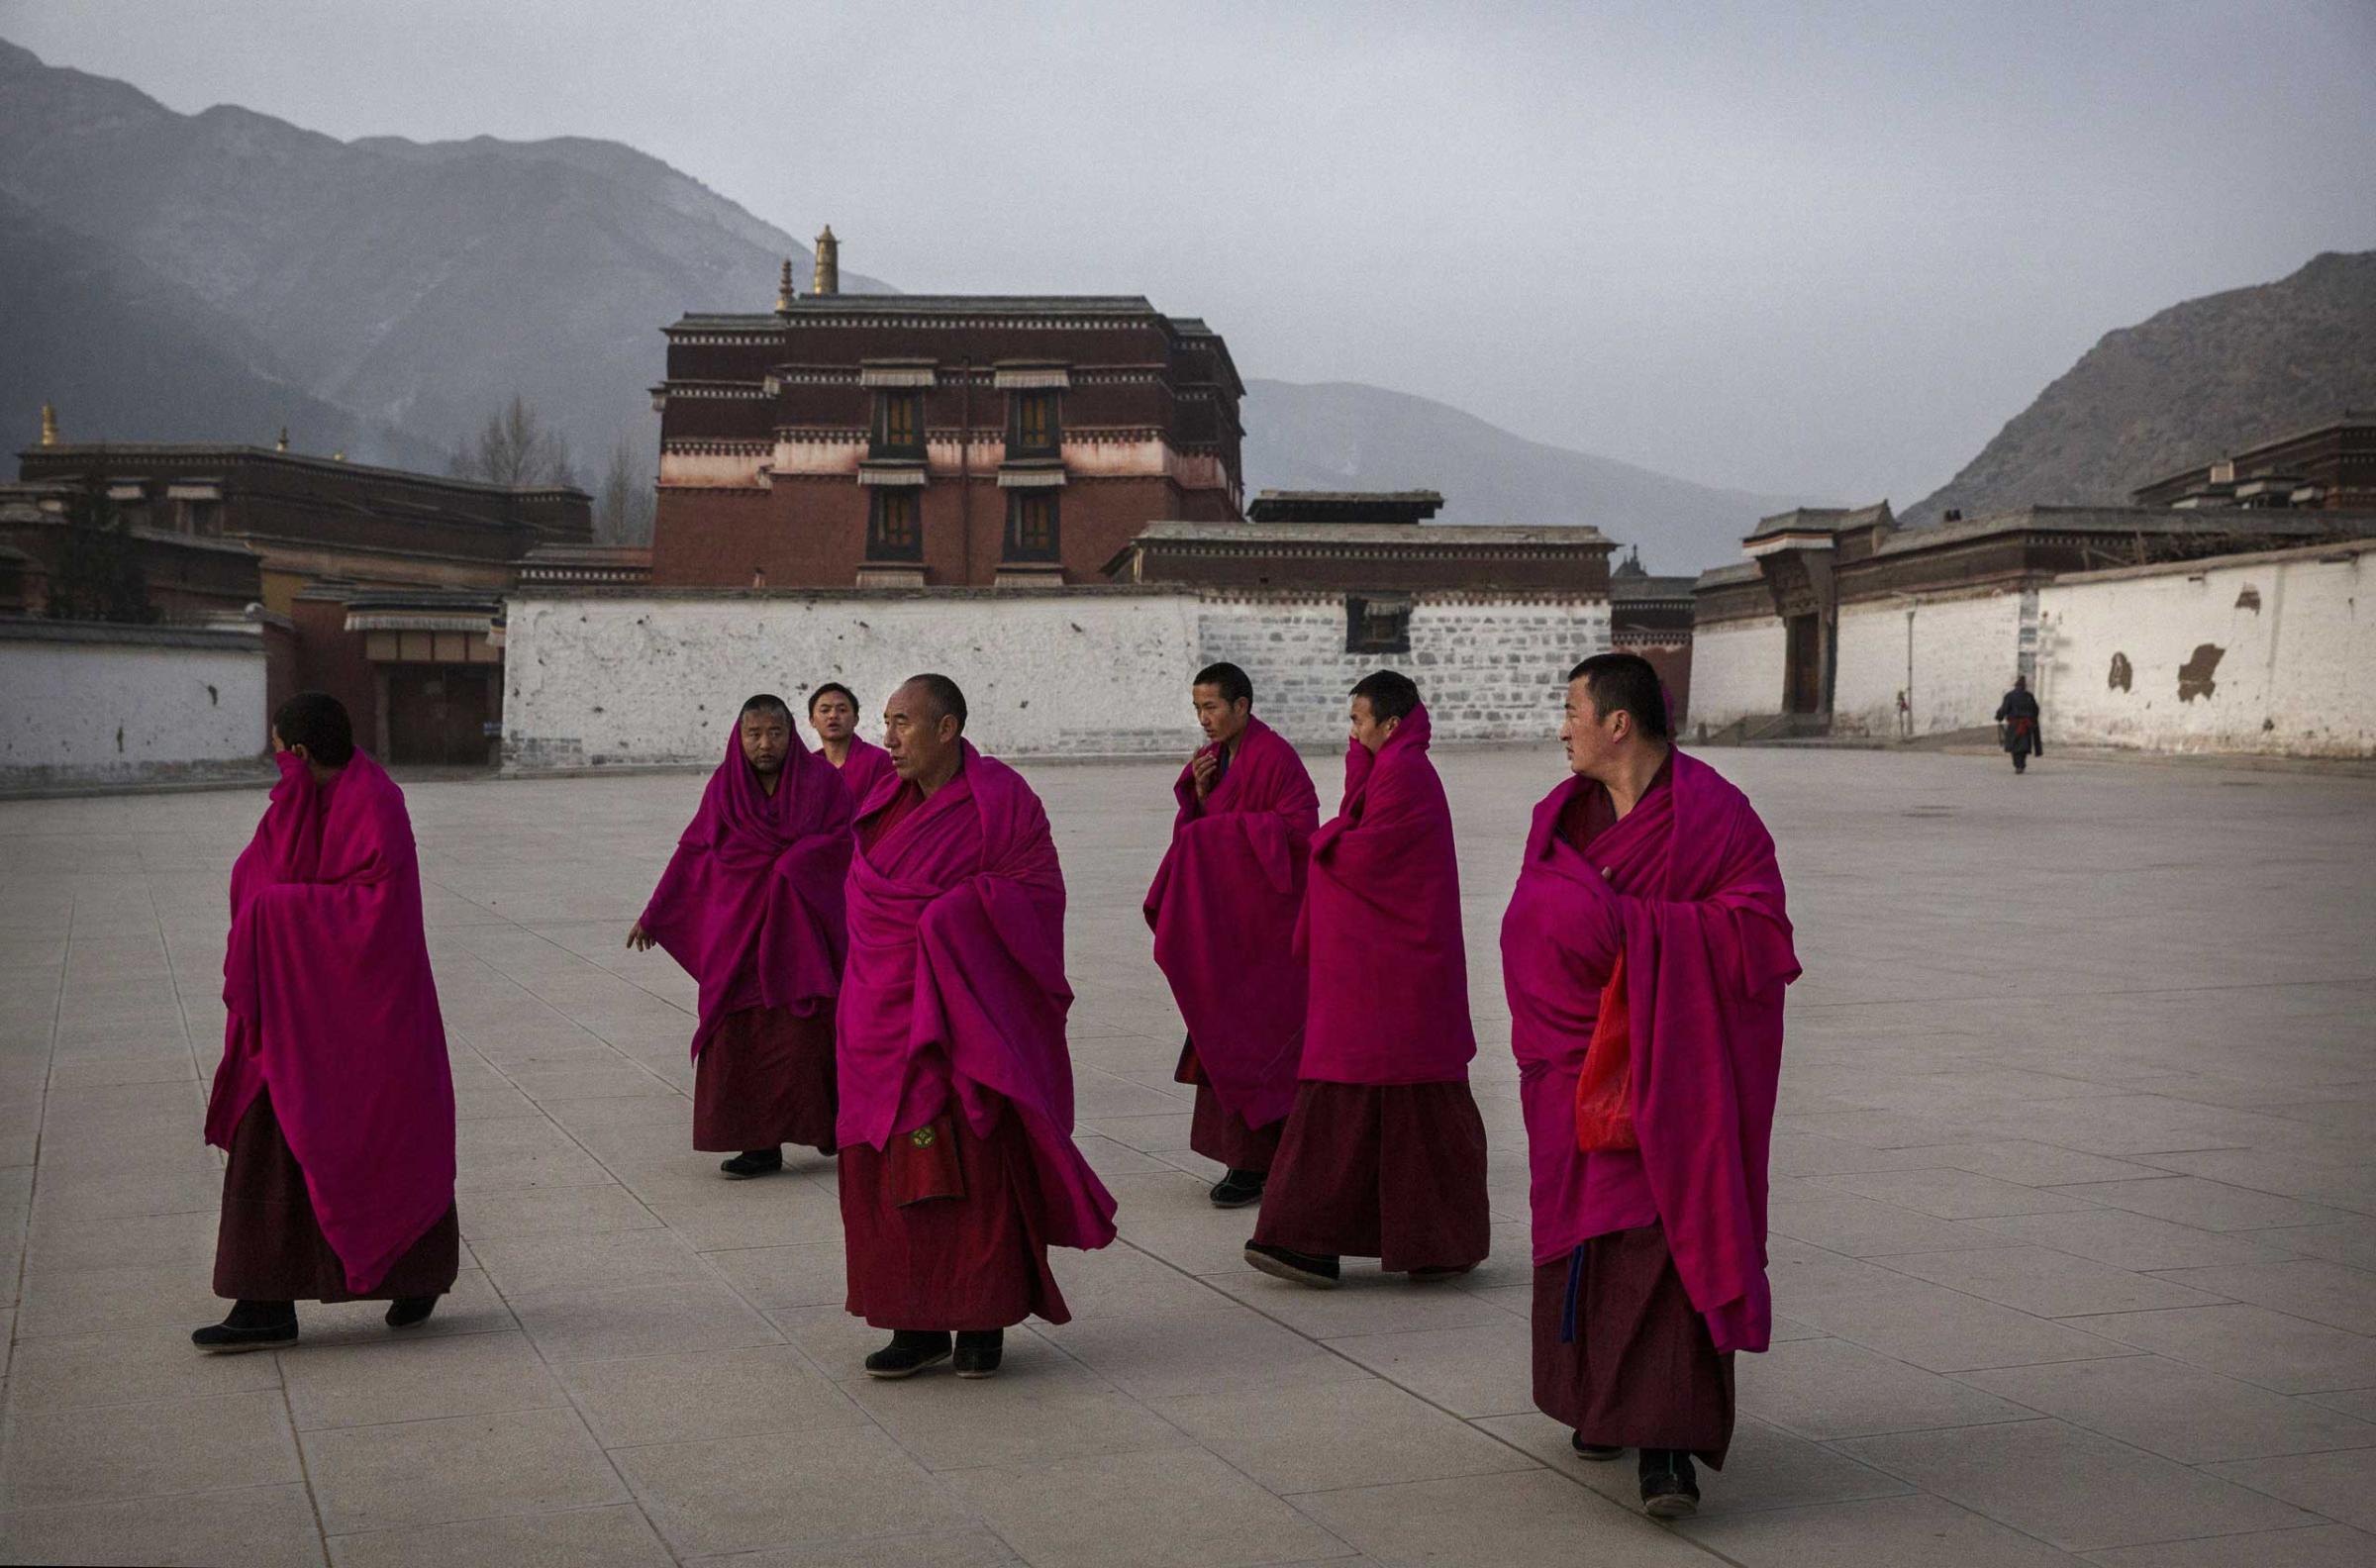 Tibetan Buddhist Monks of the Gelug, or Yellow Hat order, leave morning prayers during Monlam or the Great Prayer rituals on March 3, 2015 at the Labrang Monastery, Xiahe County, Amdo, Tibetan Autonomous Prefecture, Gansu Province, China.